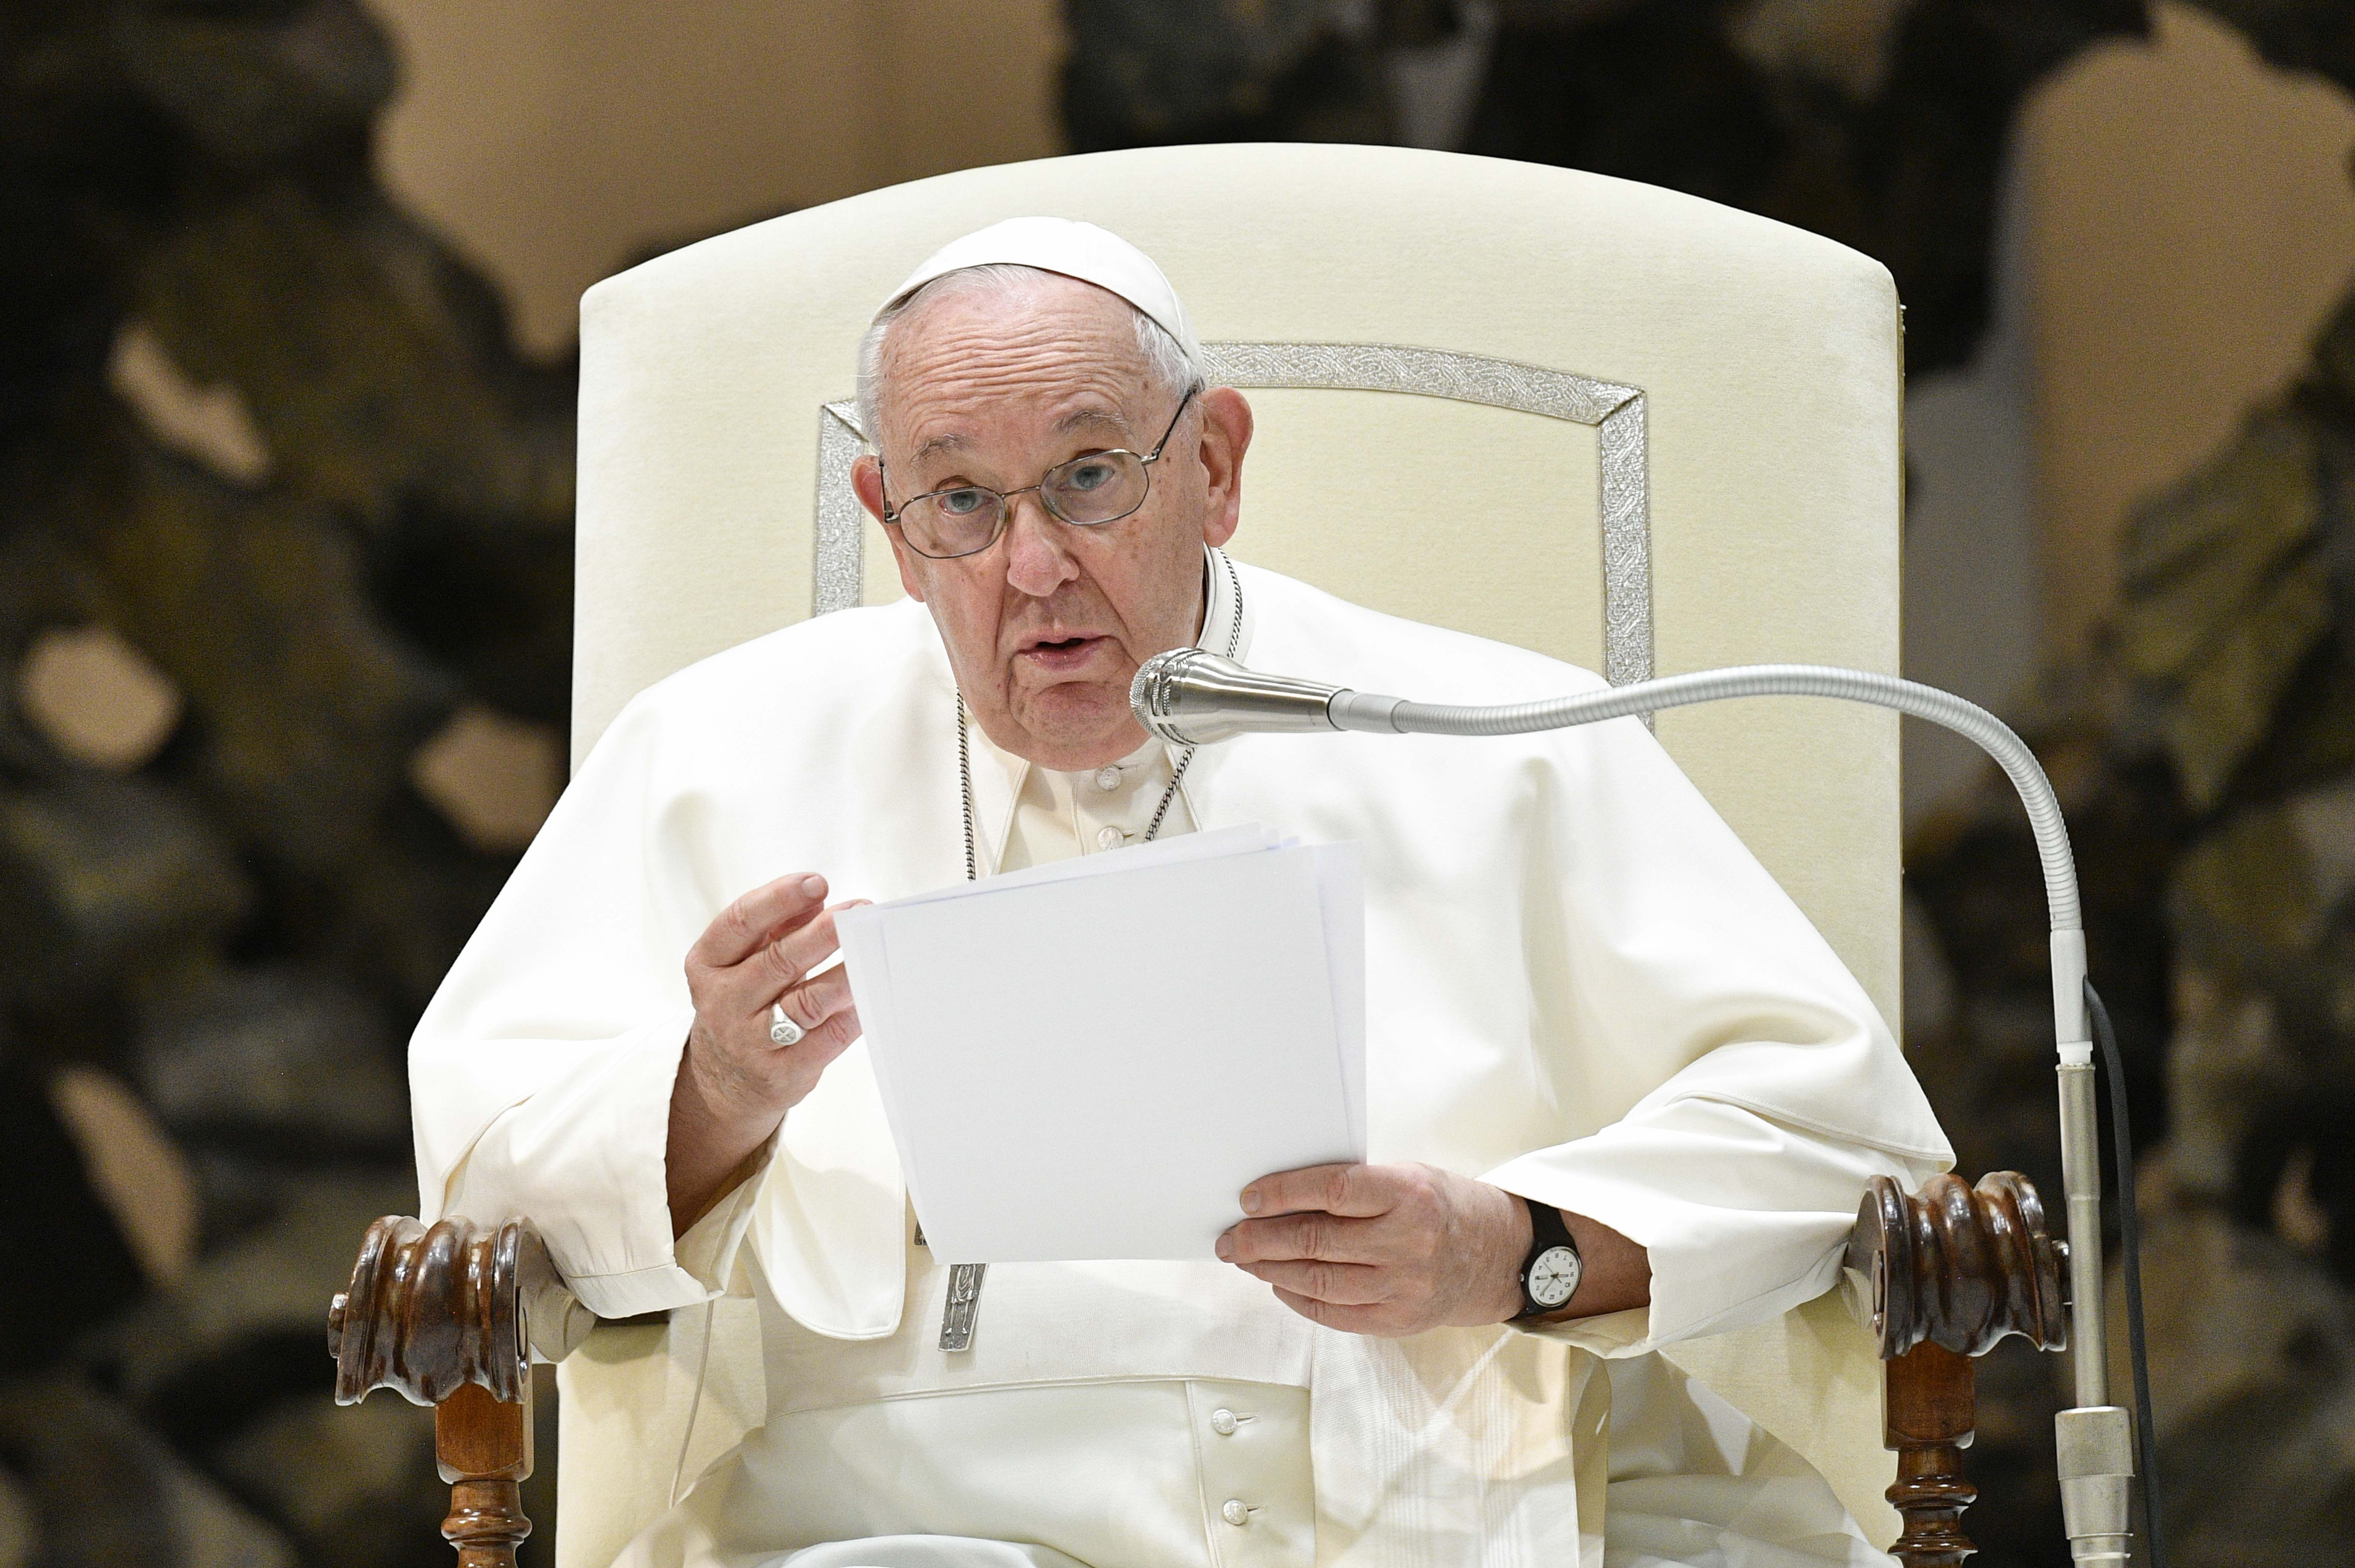 Pope Francis: Gender ideology is one of the most ideological colonizations today | Catholic News Agency